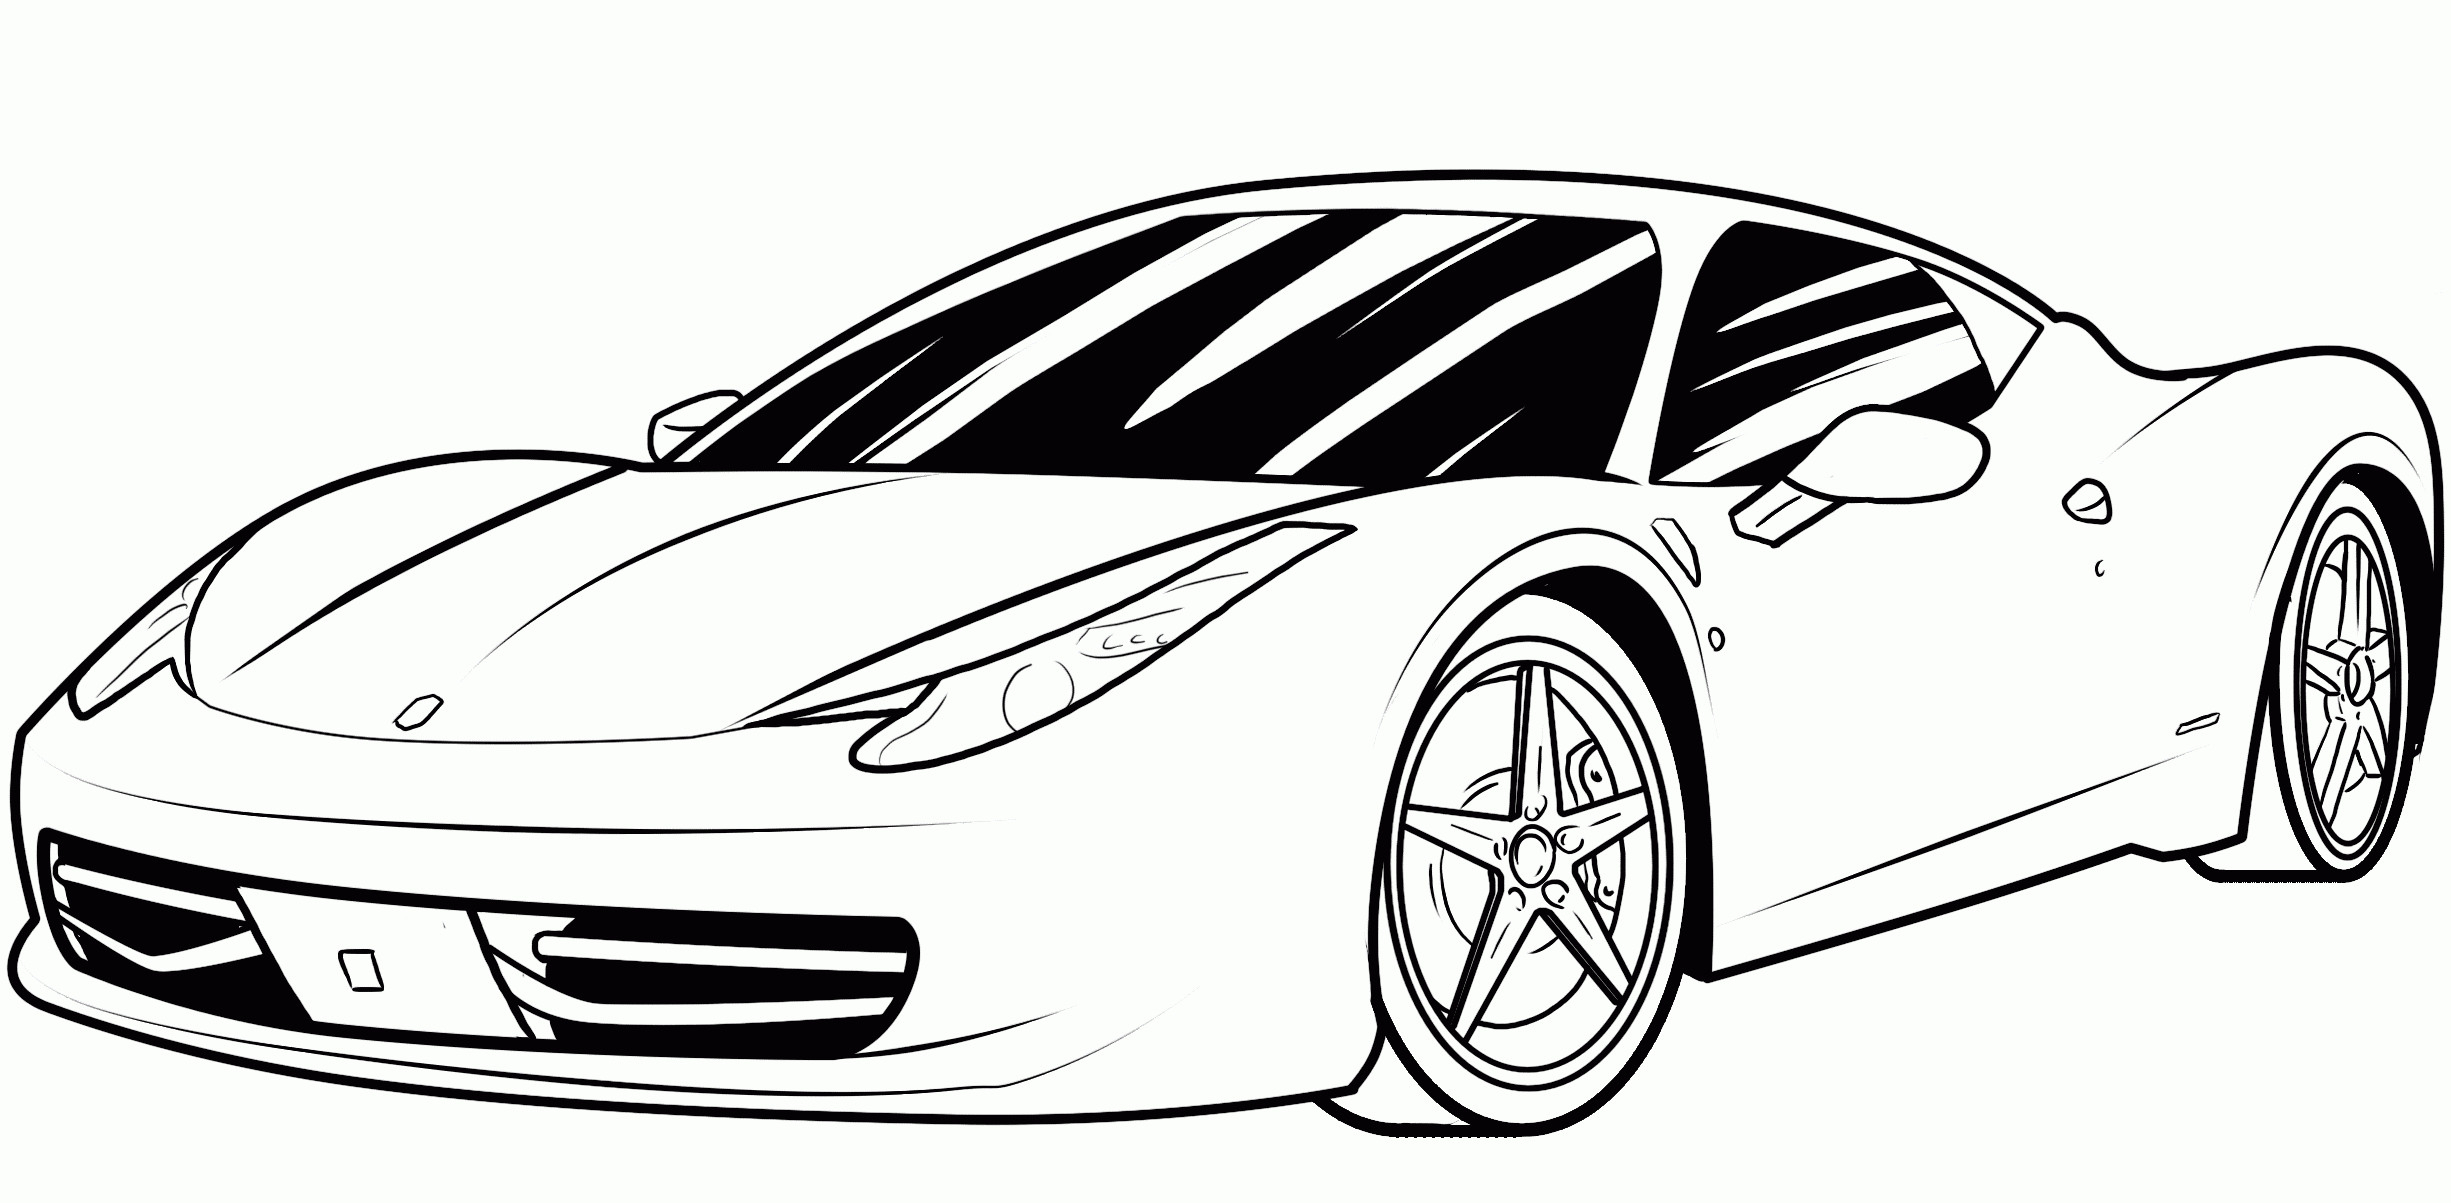 Printable Coloring Pages Cars Bargain Car Printable Coloring Pages Cars Bonnieleepanda Com At Car